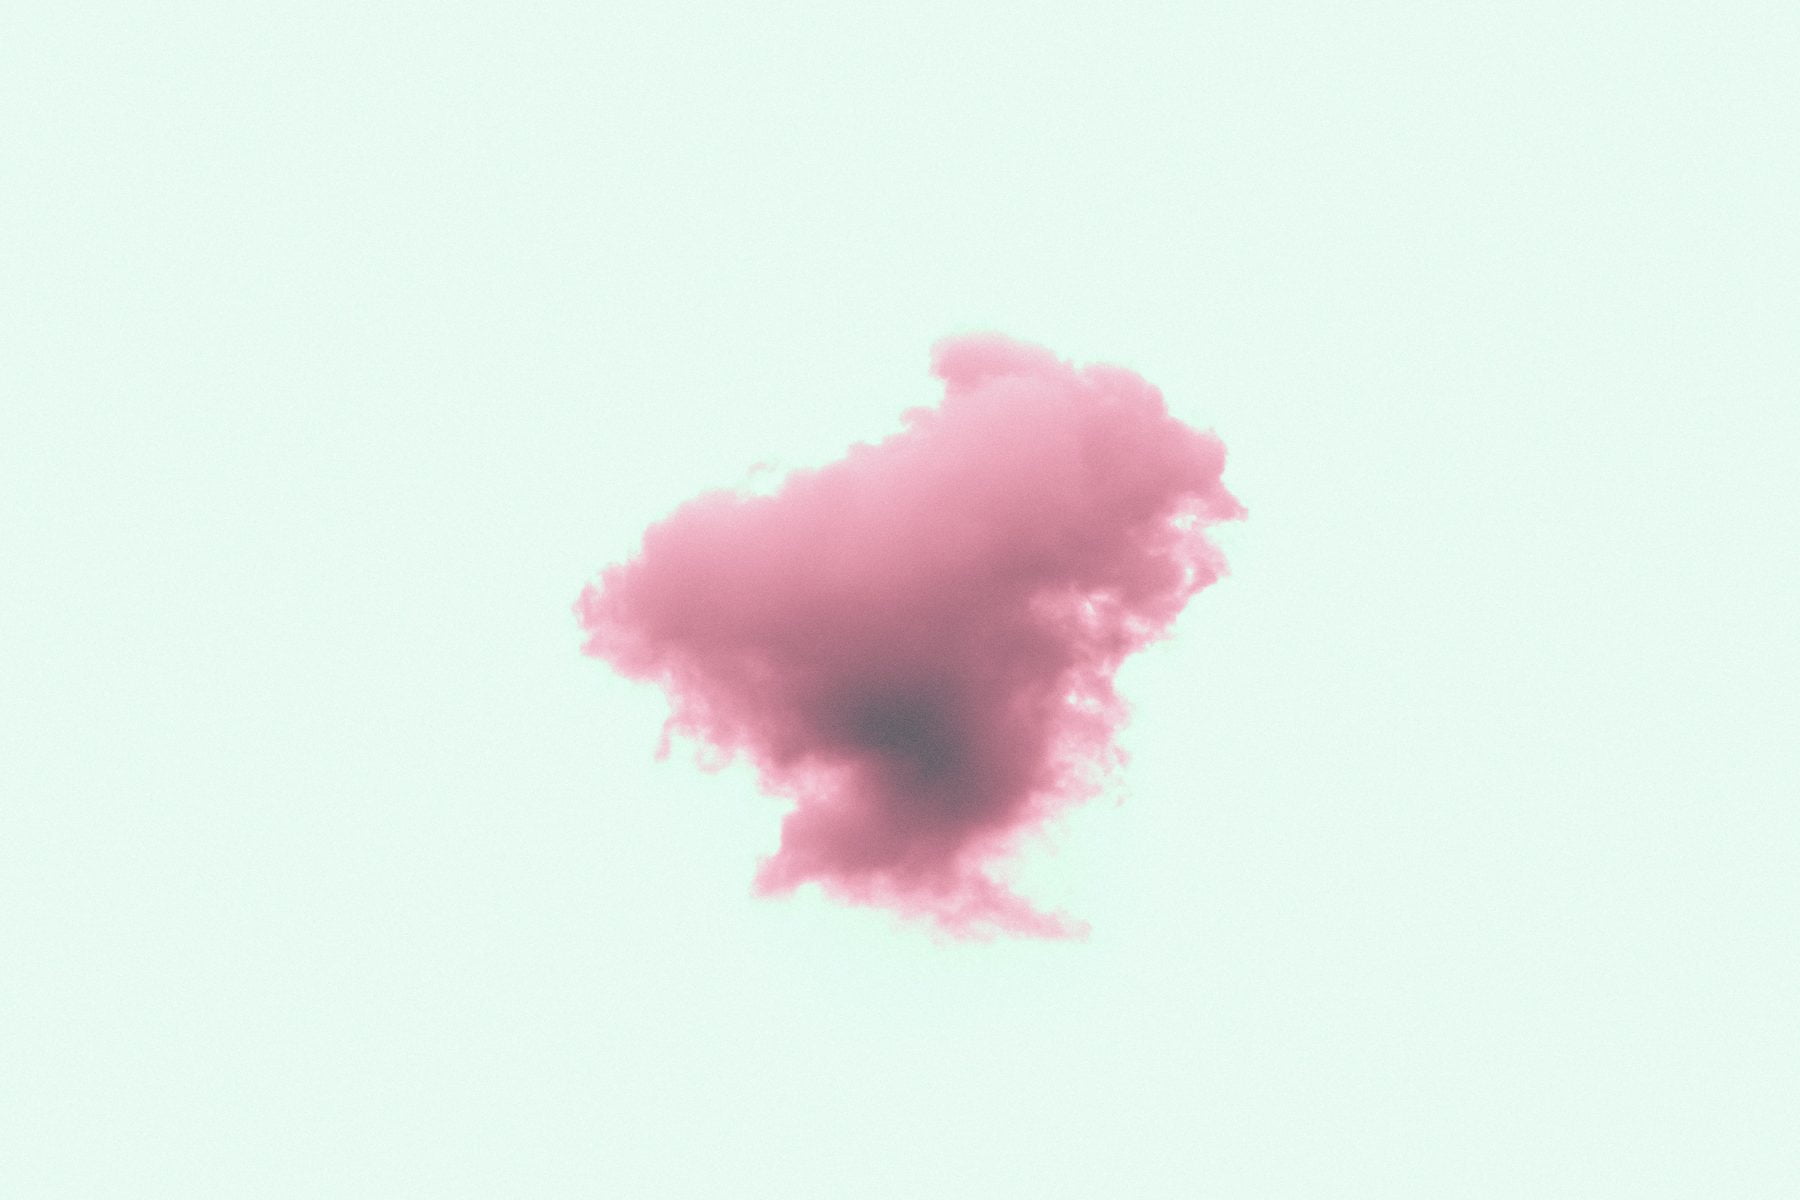 Image of a pink cloud: How to keep your cool when the red mist descends in a difficult conversation